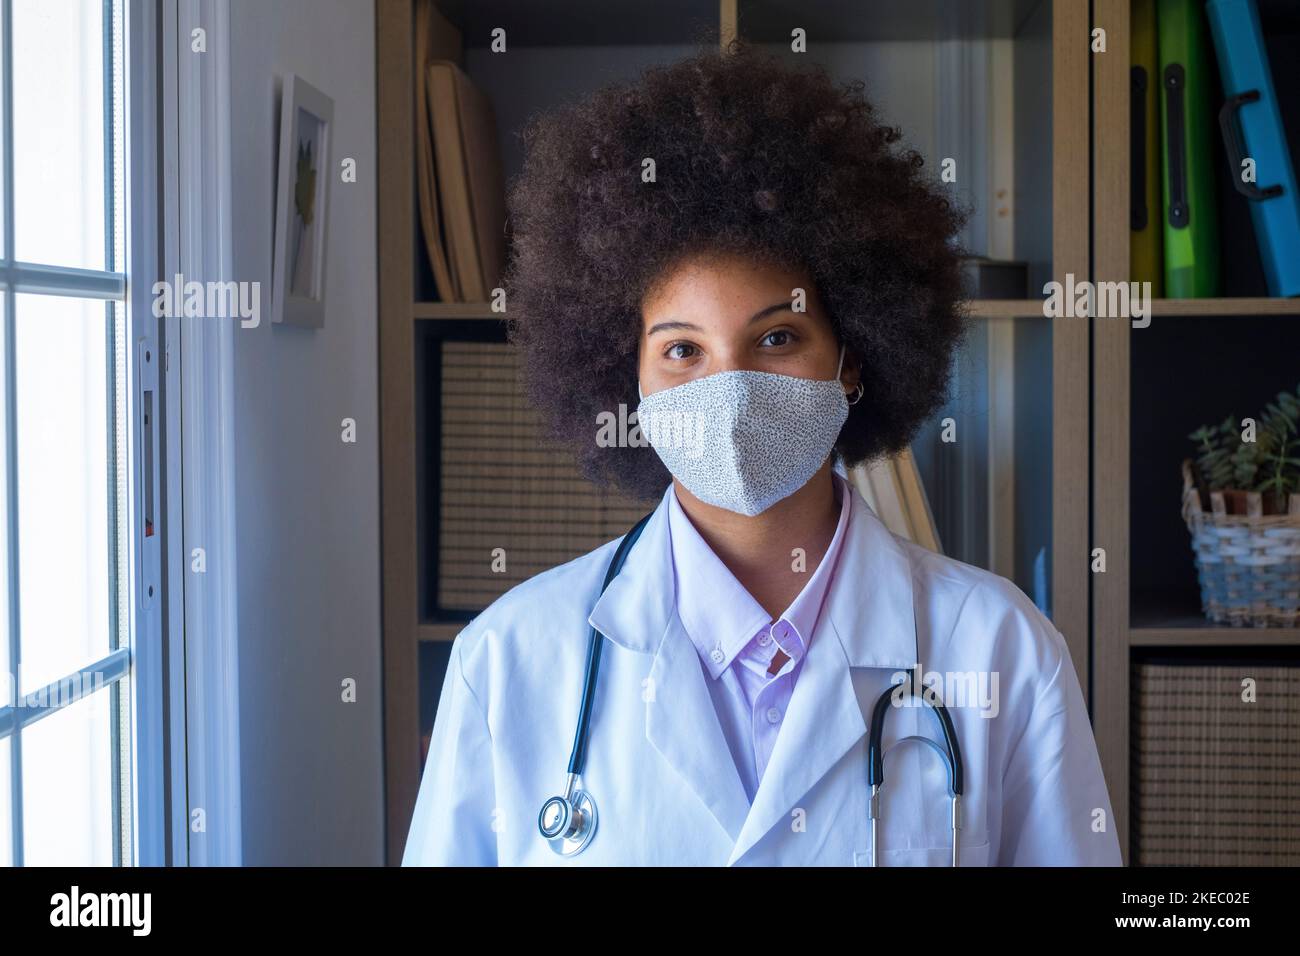 Woman healthcare worker in medical facial cover to protect self from coronavirus outbreak. Portrait of professional african american female doctor wearing protective medical face mask and uniform looking at camera Stock Photo